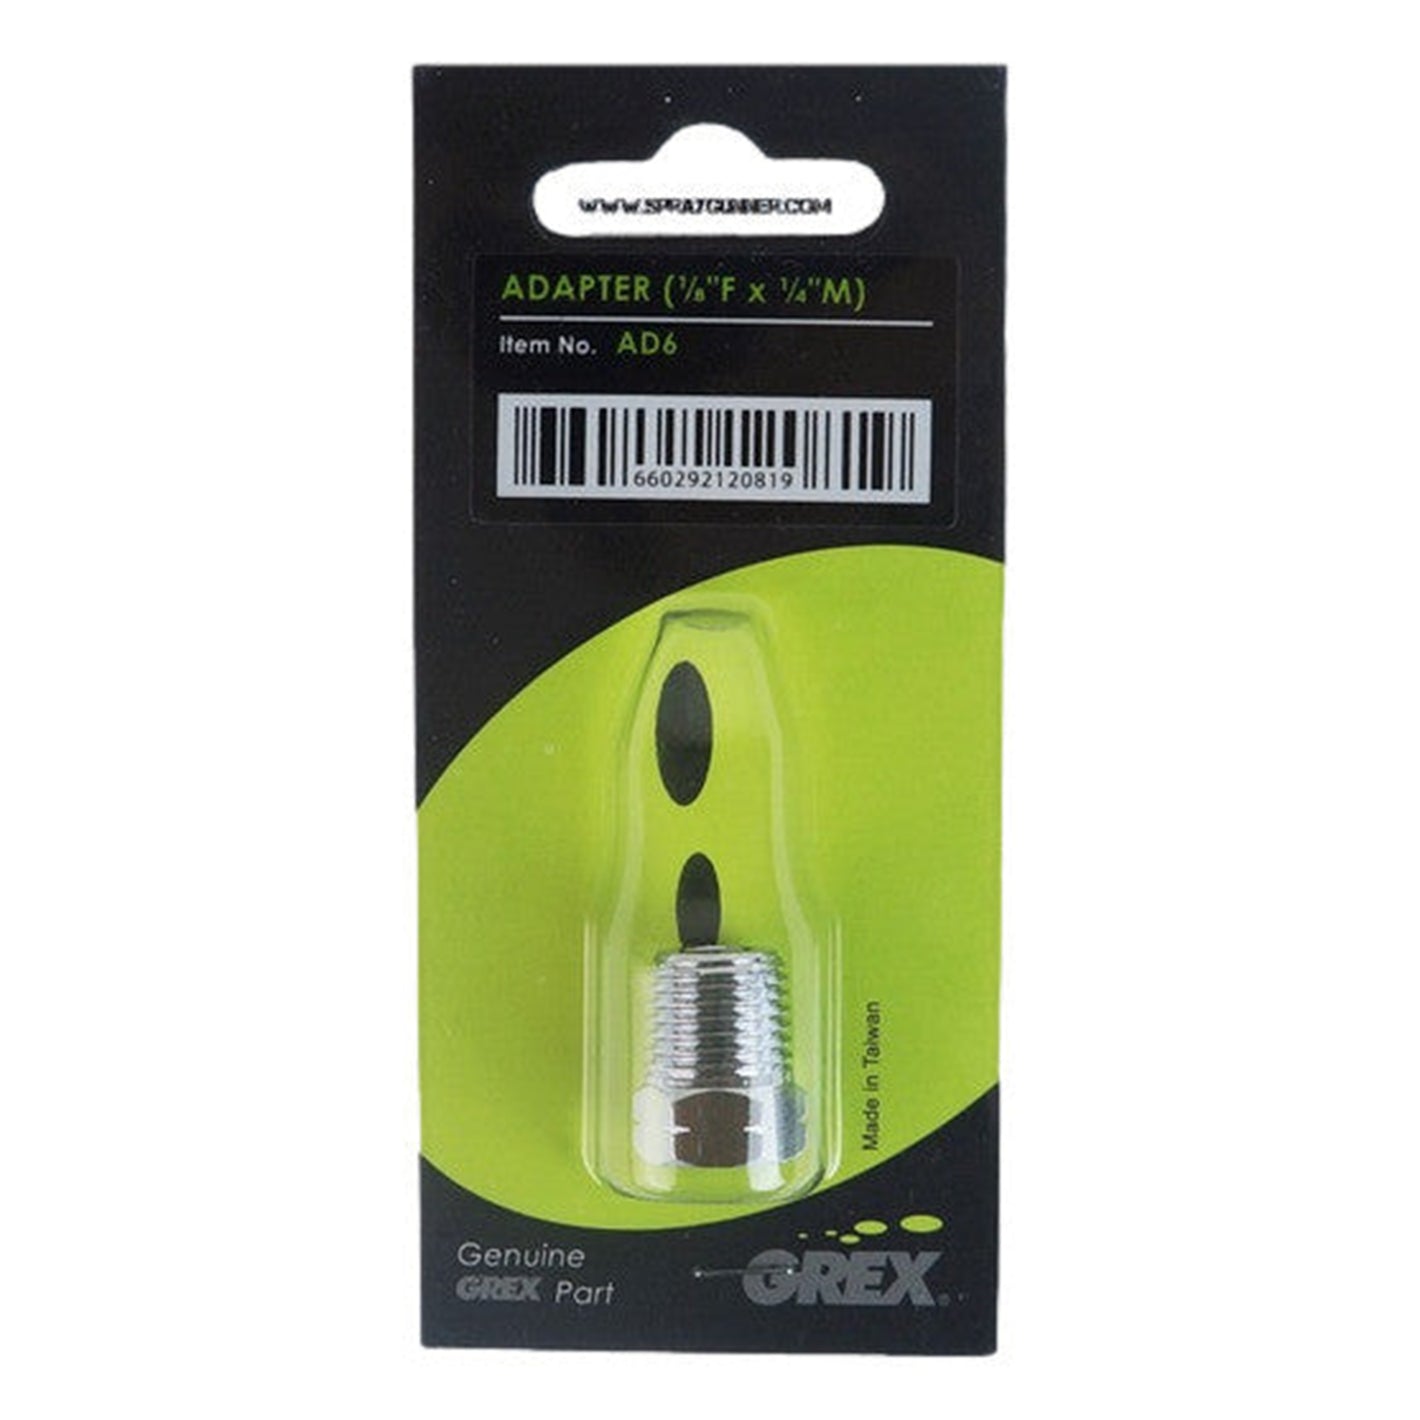 Grex Adapter, 1/8"F to 1/4"M